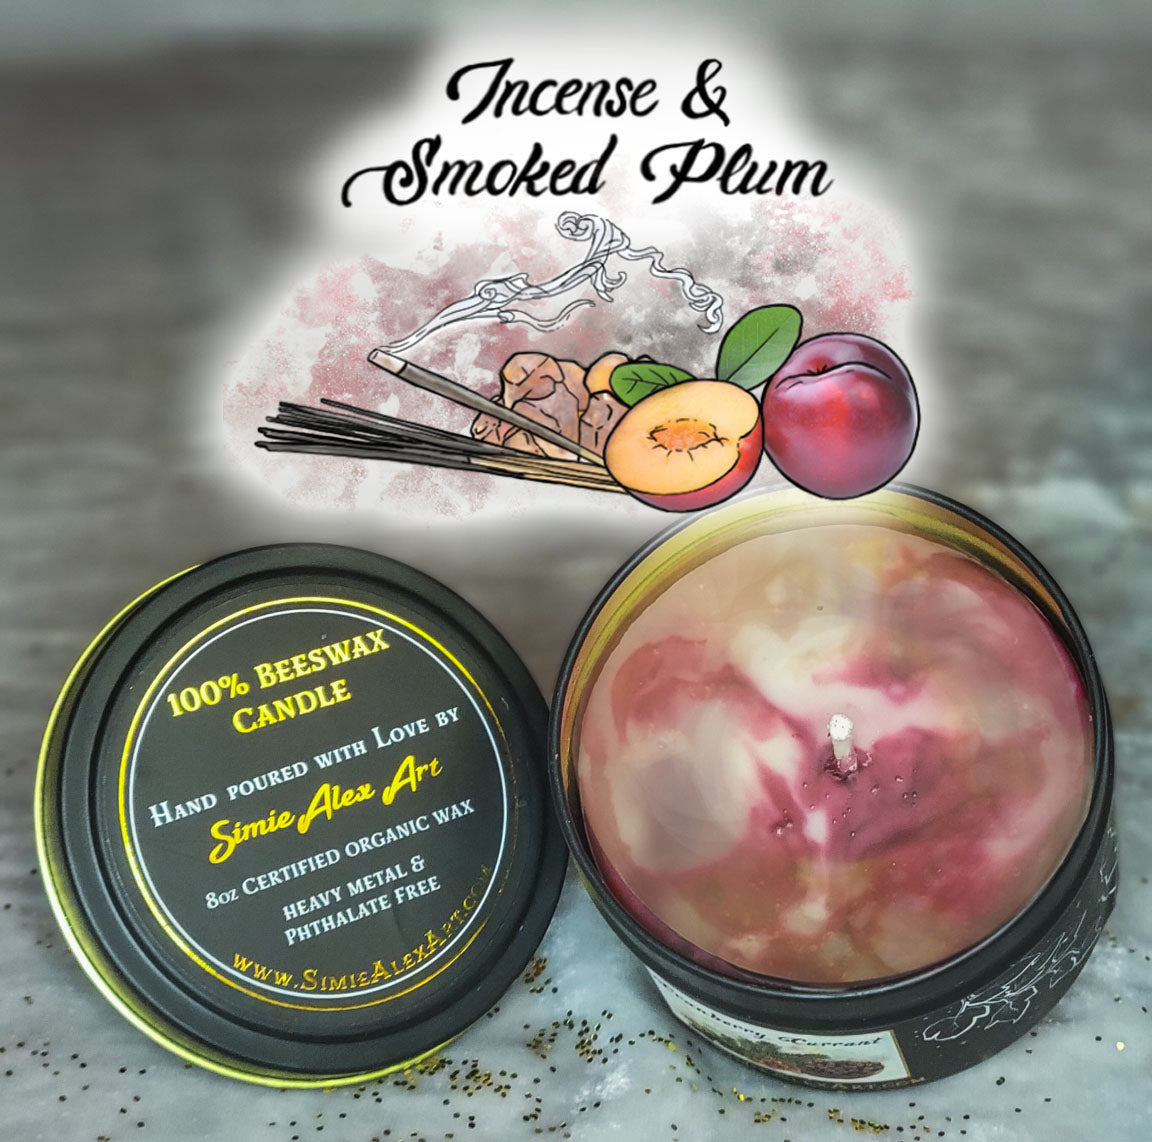 Incense & Smoked Plum Beeswax Candle